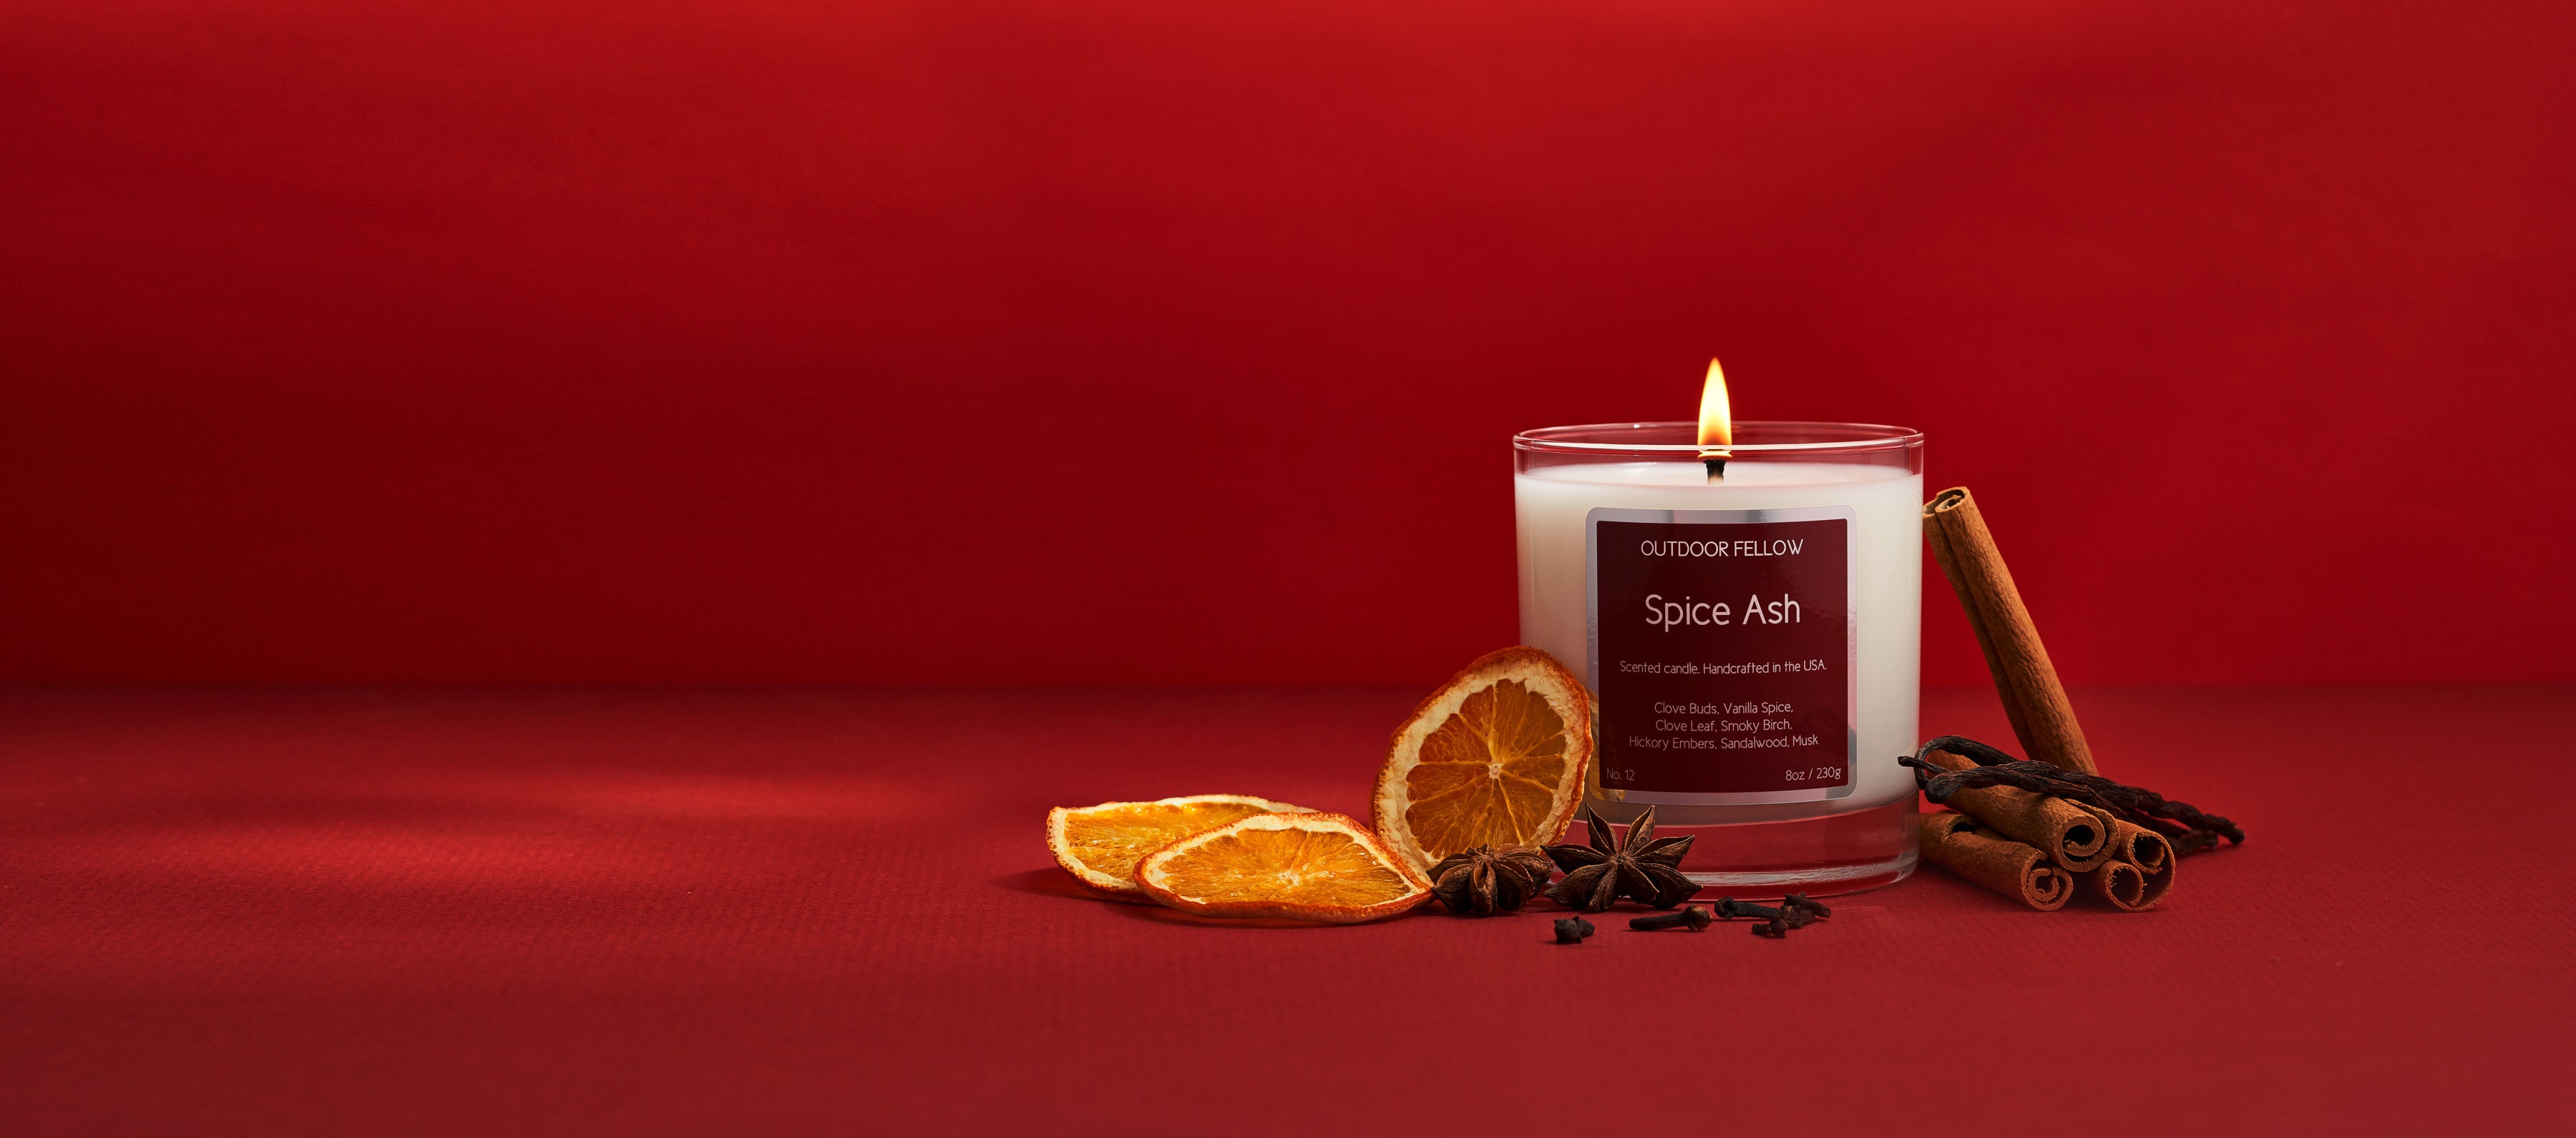 Spice Ash scented candle on red background